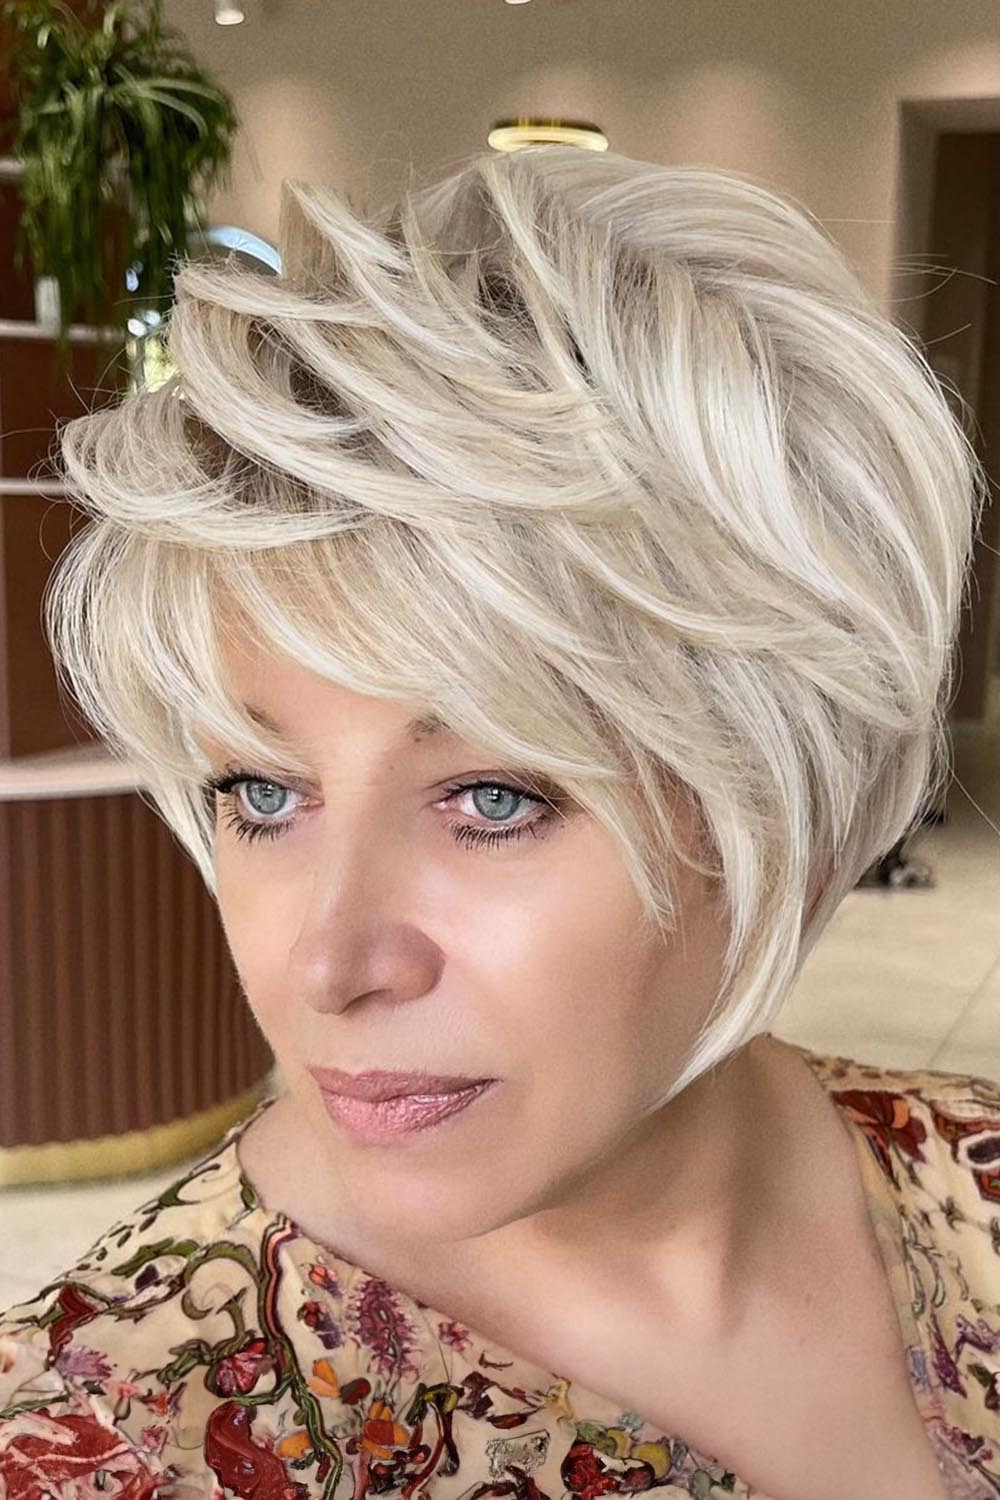 80+ Hot Hairstyles For Women Over 50 - Love Hairstyles